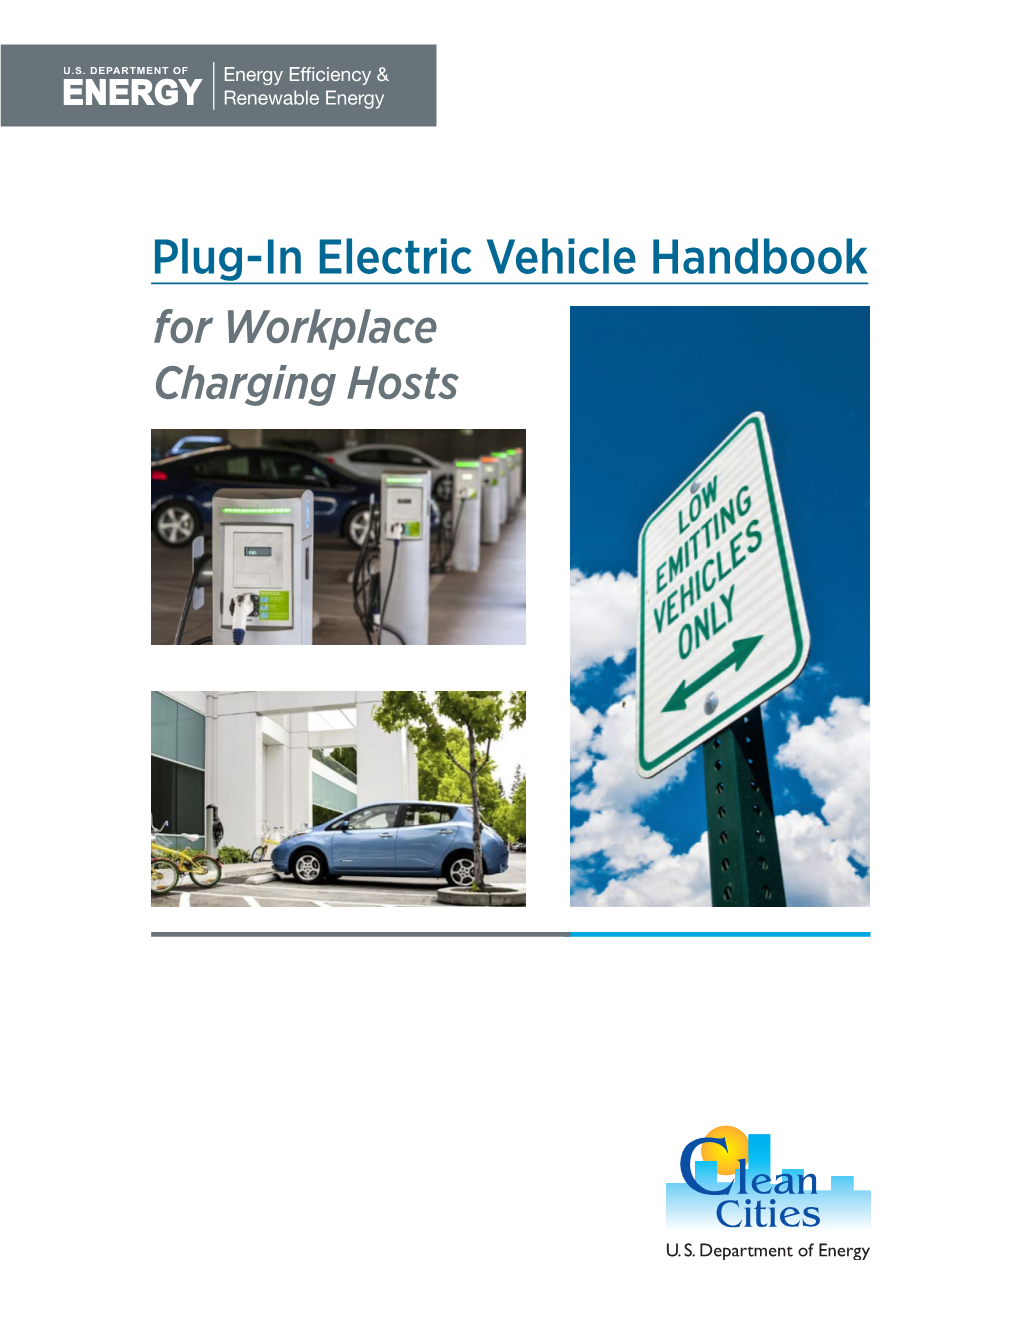 Plug-In Electric Vehicle Handbook for Workplace Charging Hosts 2 Plug-In Electric Vehicle Handbook for Workplace Charging Hosts